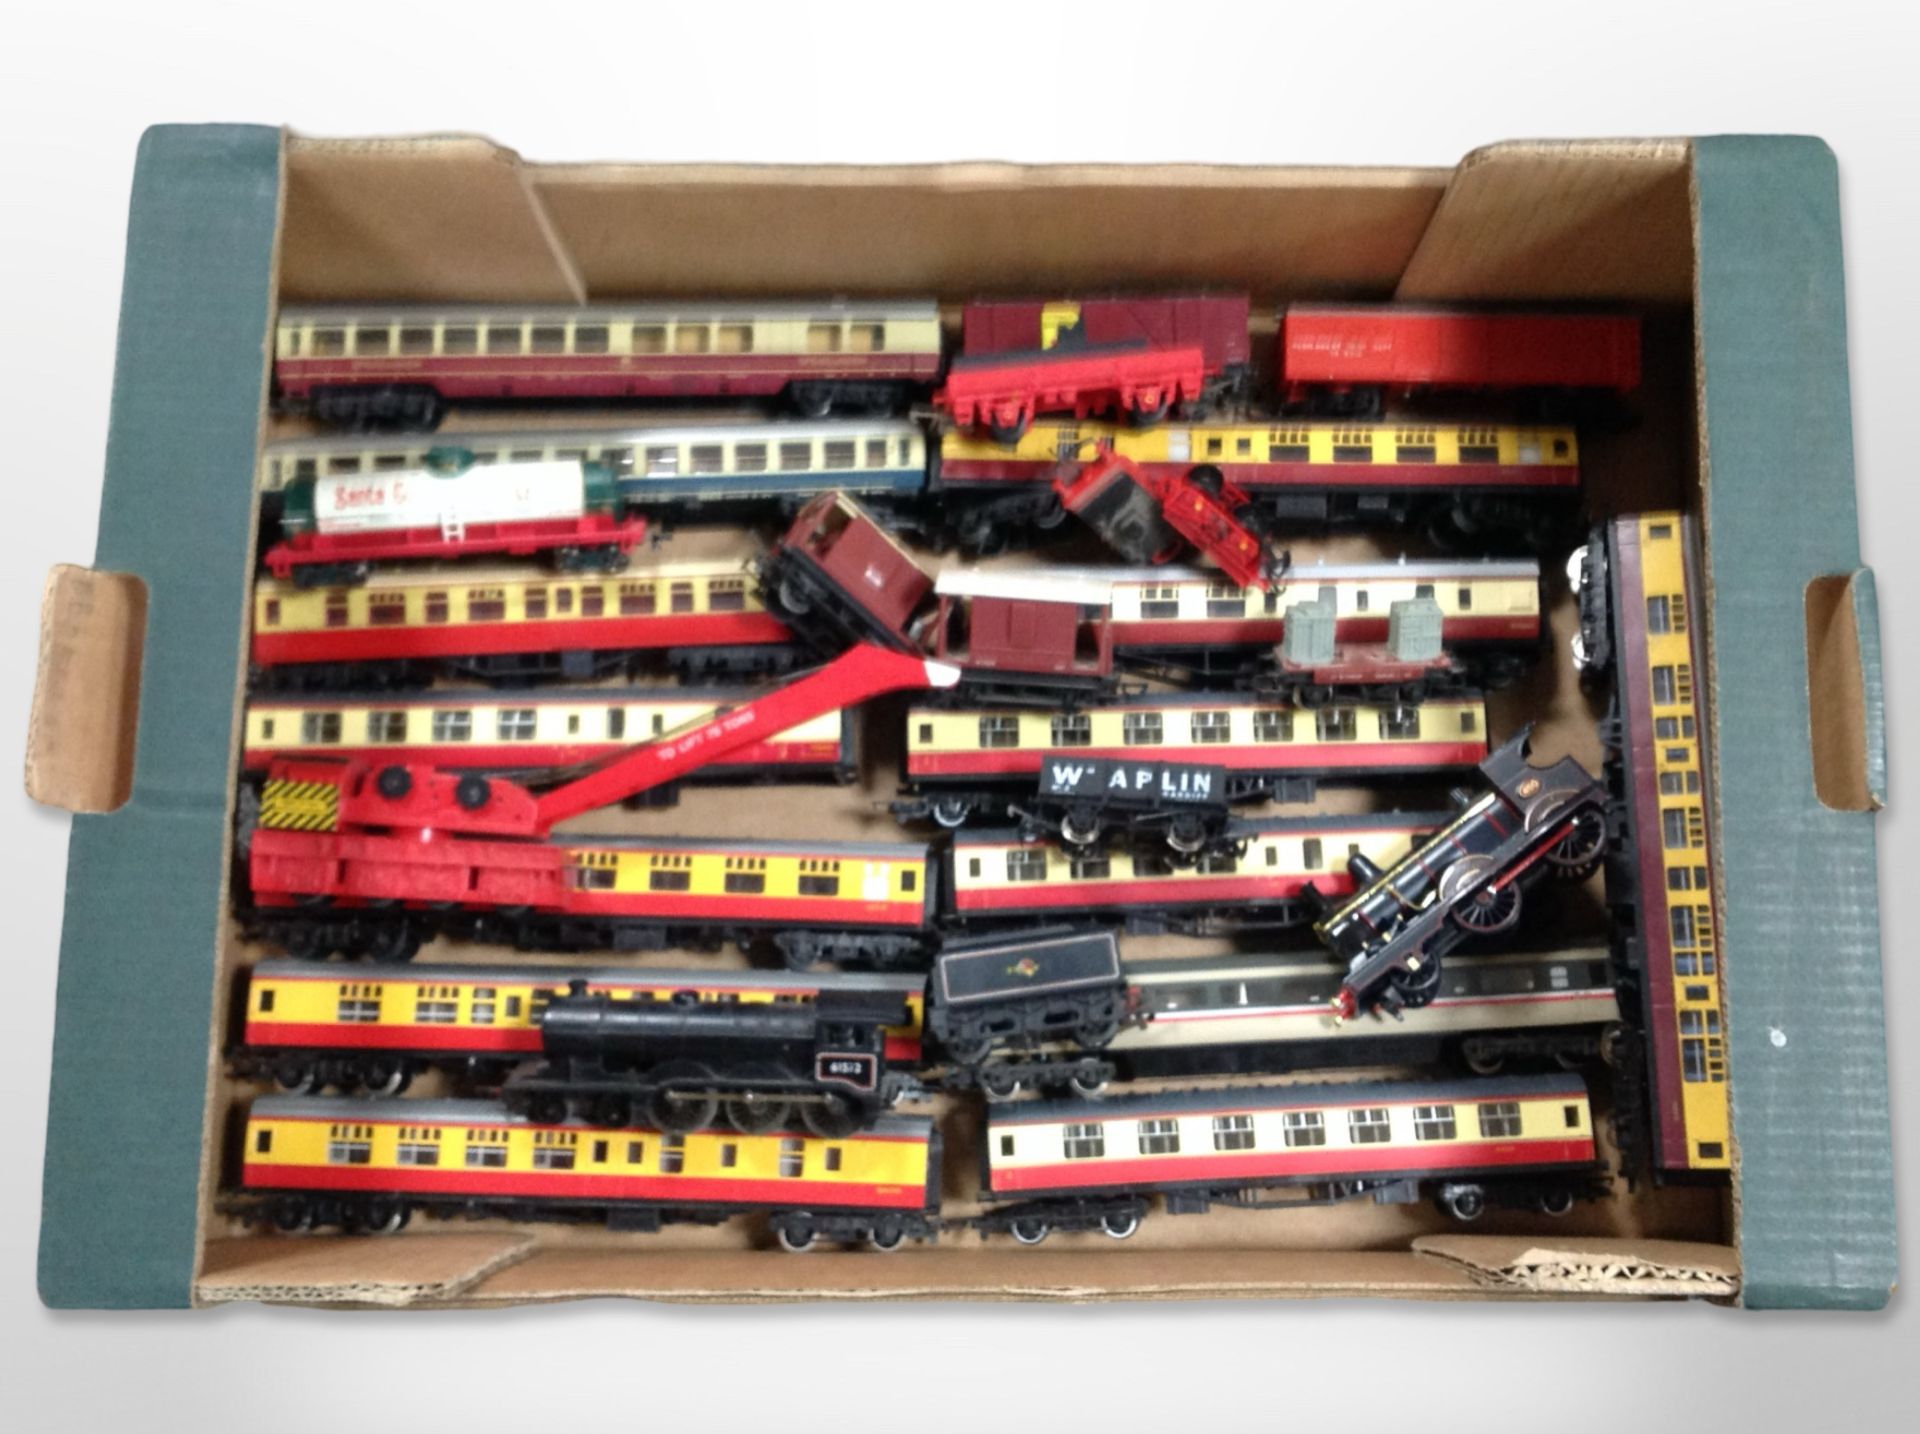 A collection of 00 gauge locomotives and passenger cars including Matchbox, Tri-ang, Hornby, etc.